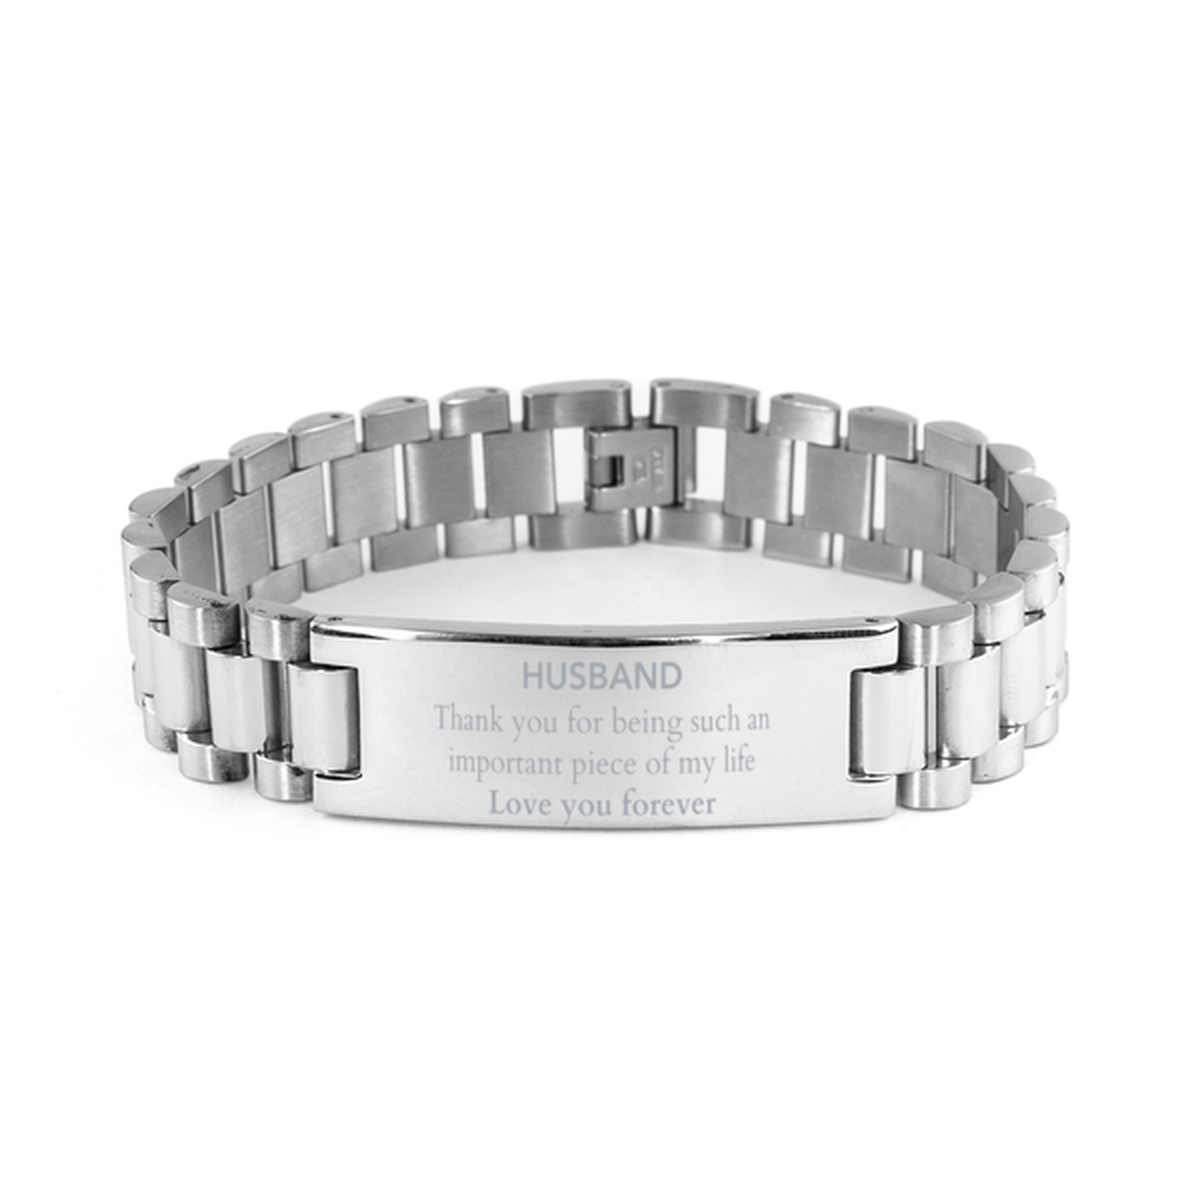 Appropriate Husband Ladder Stainless Steel Bracelet Epic Birthday Gifts for Husband Thank you for being such an important piece of my life Husband Christmas Mothers Fathers Day